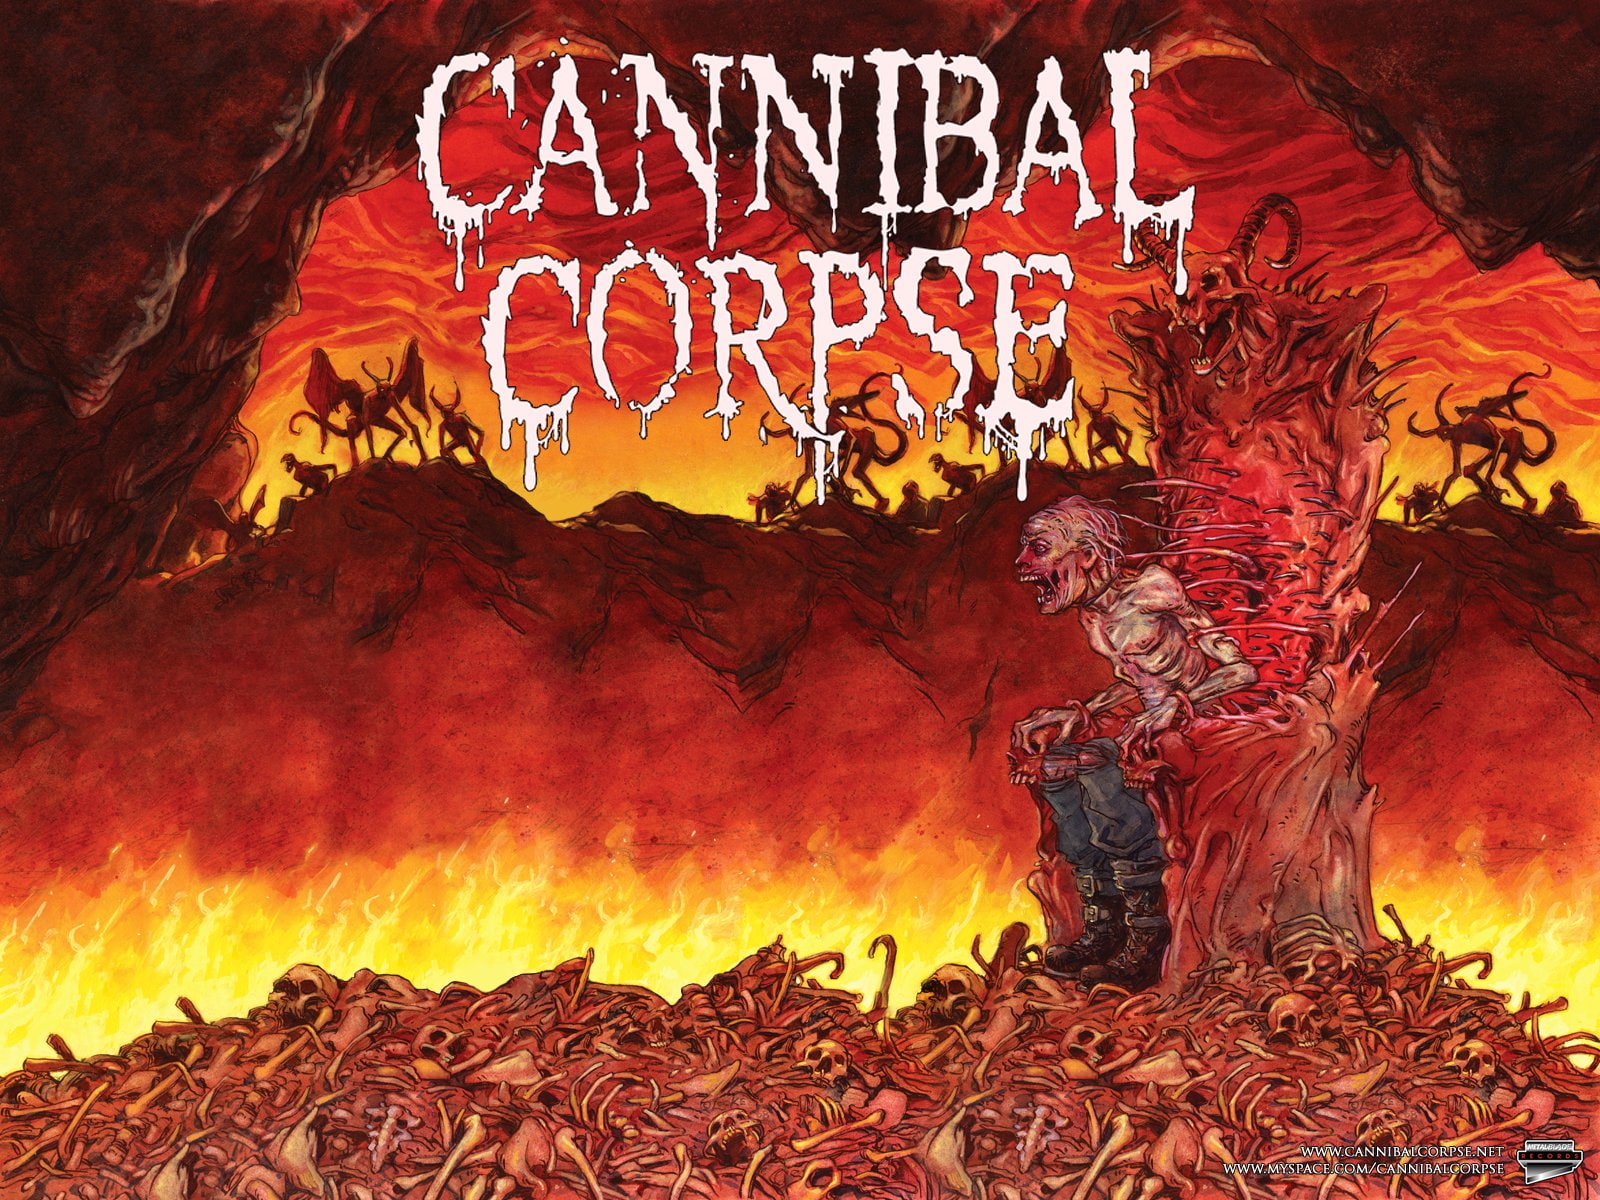 Band (Music), Cannibal Corpse, Death Metal